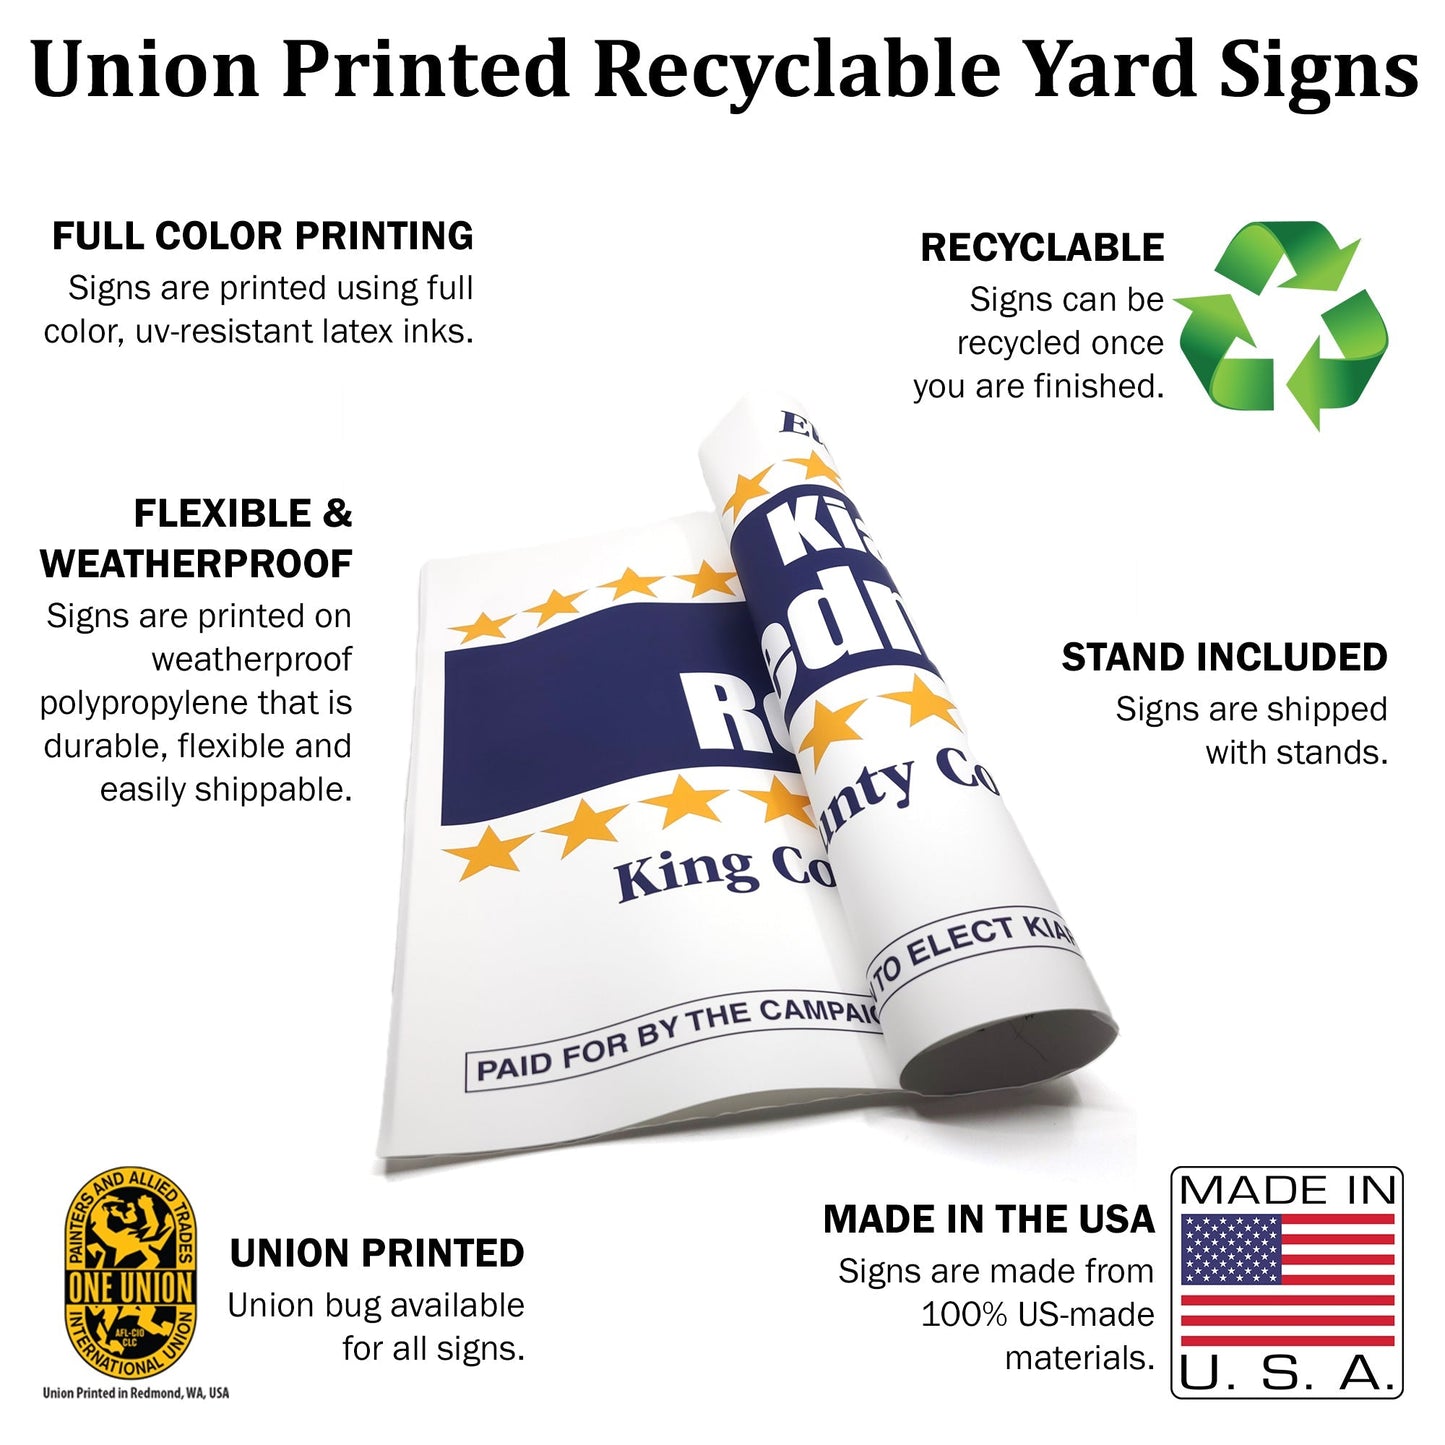 MerchBlue Union-Printed Yard Sign - 24x18 - Star Line design - Recyclable - Made in the USA